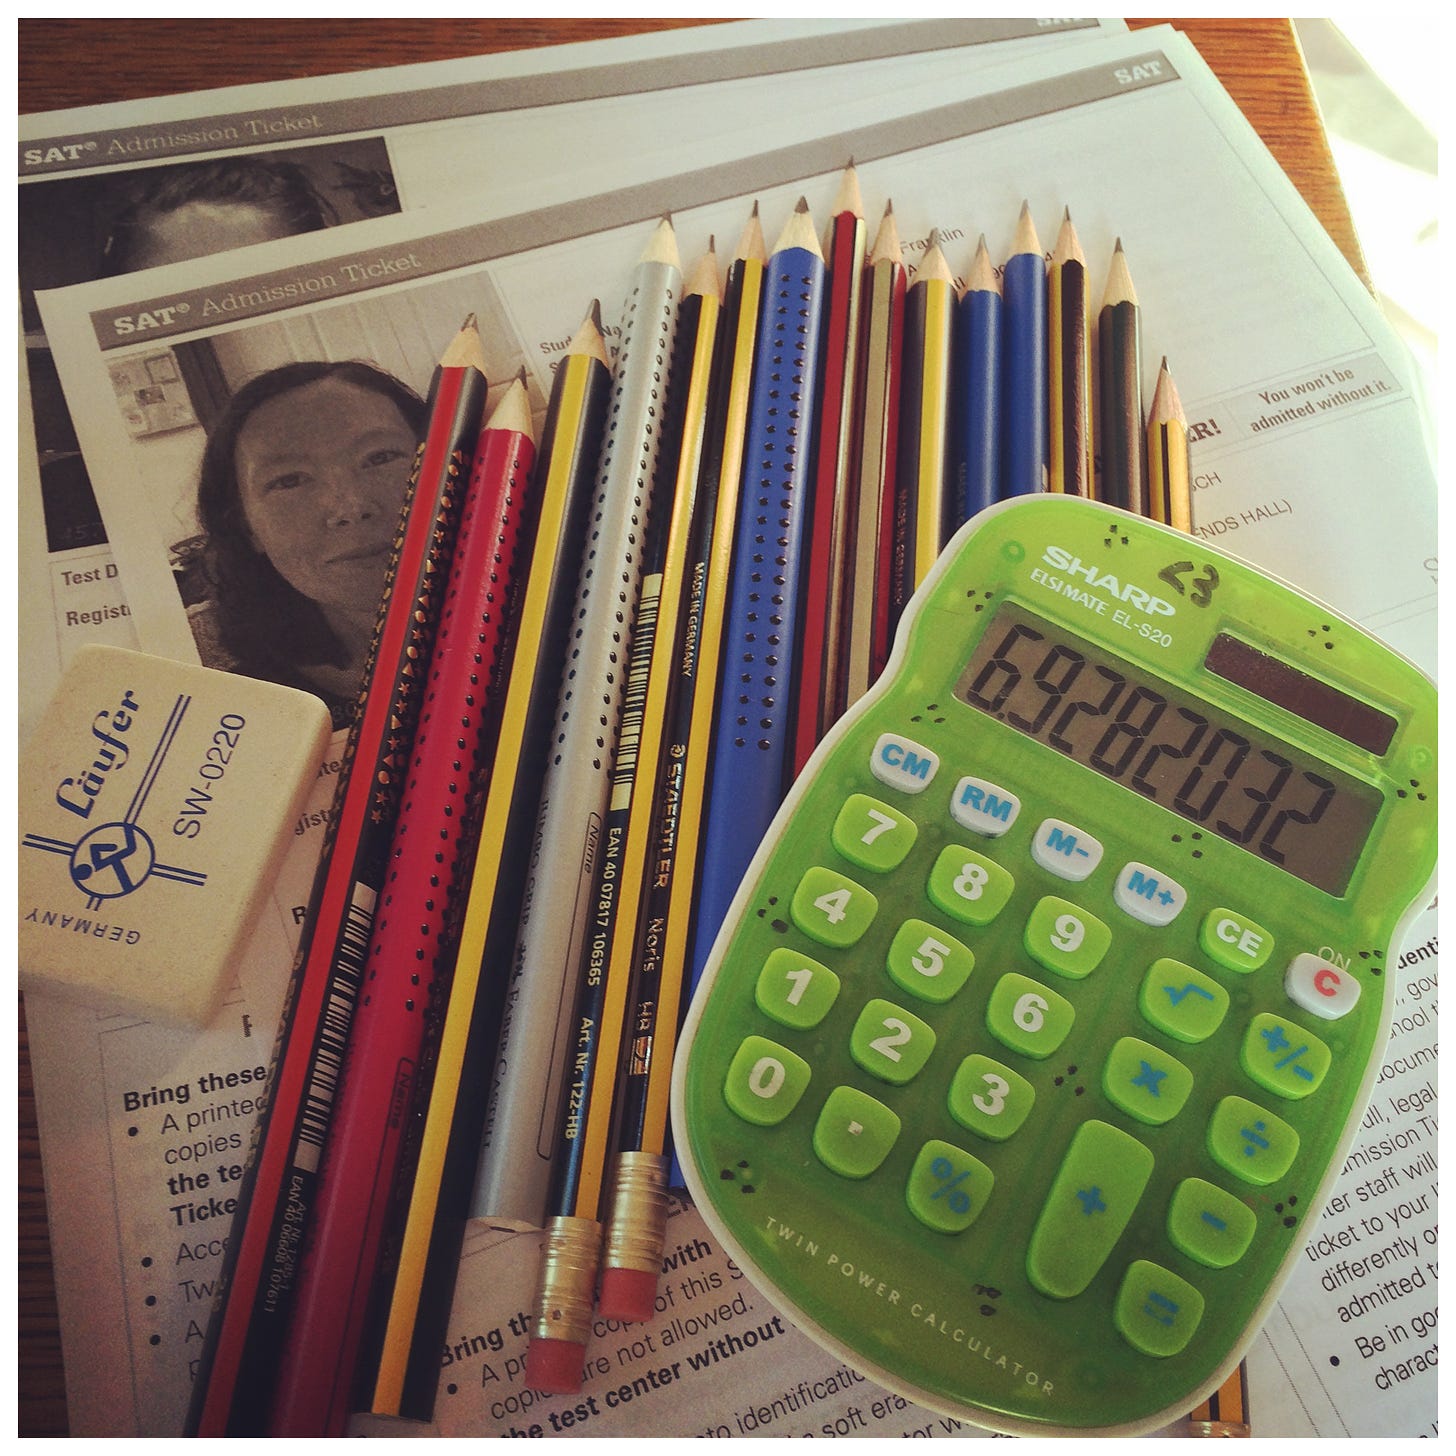 Photo of a green kid's calculator and a bunch of sharpened pencils.